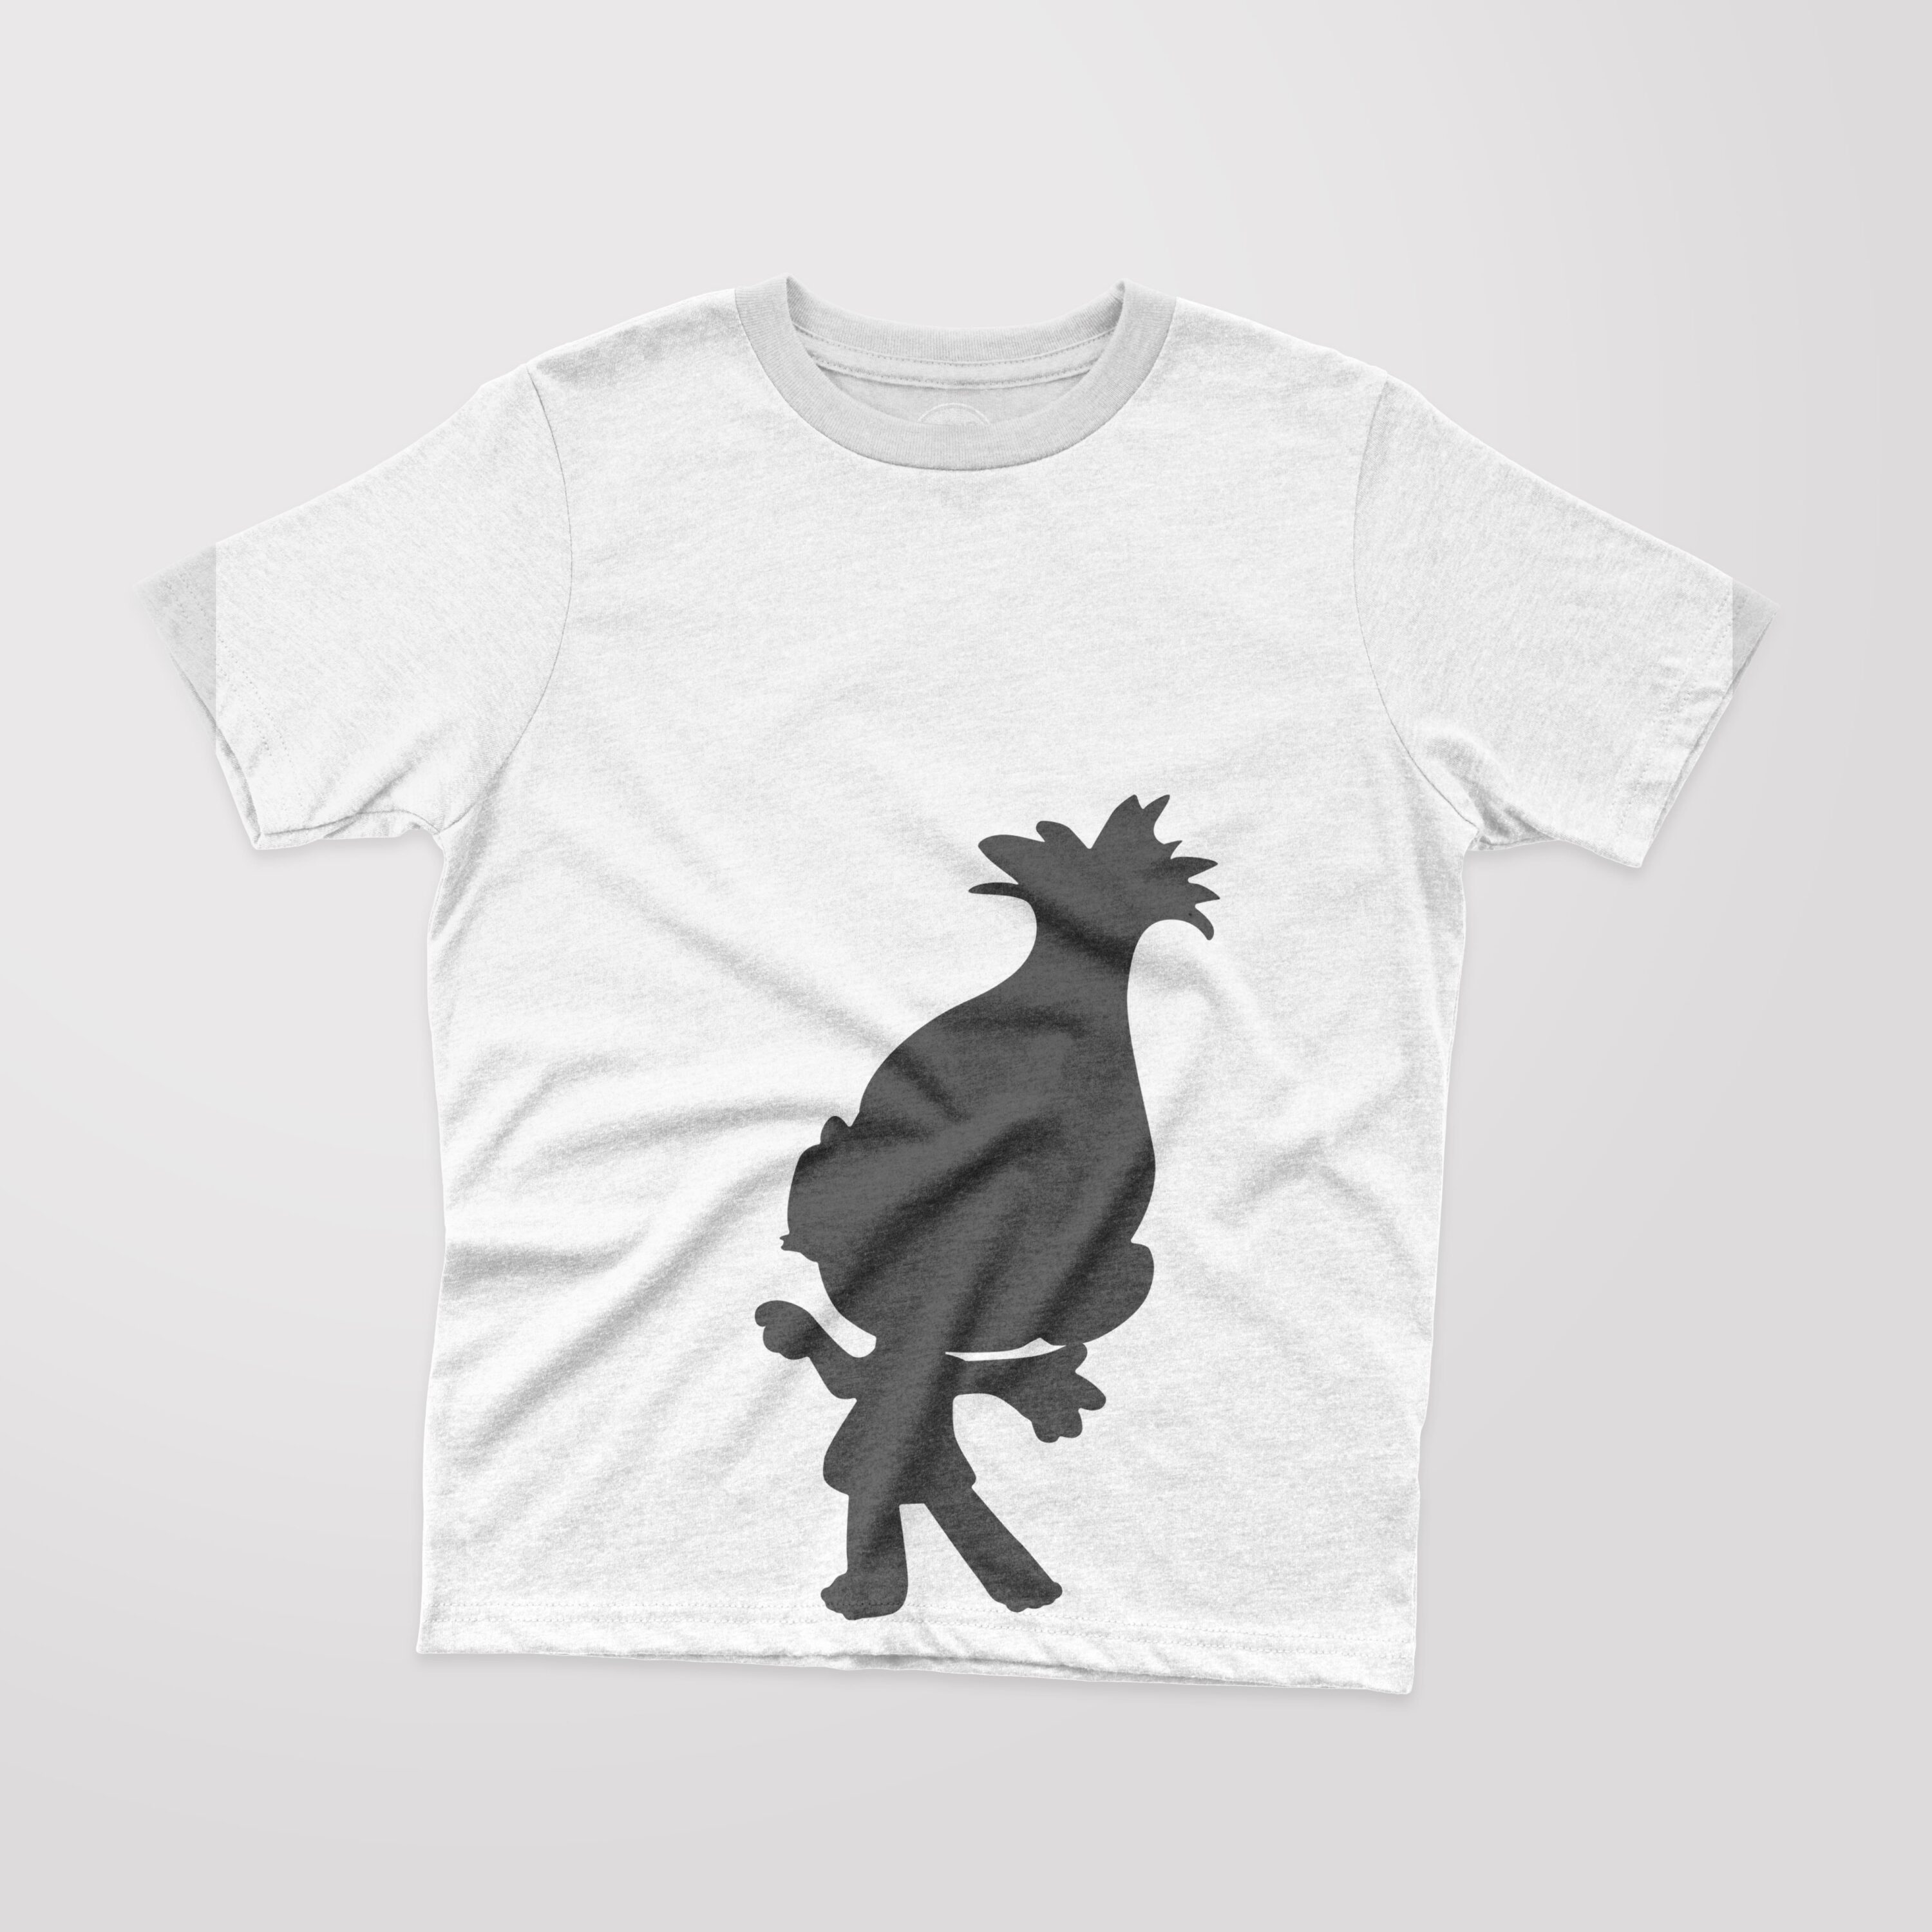 White T-shirt with a black silhouette of a cartoon character - Poppy.